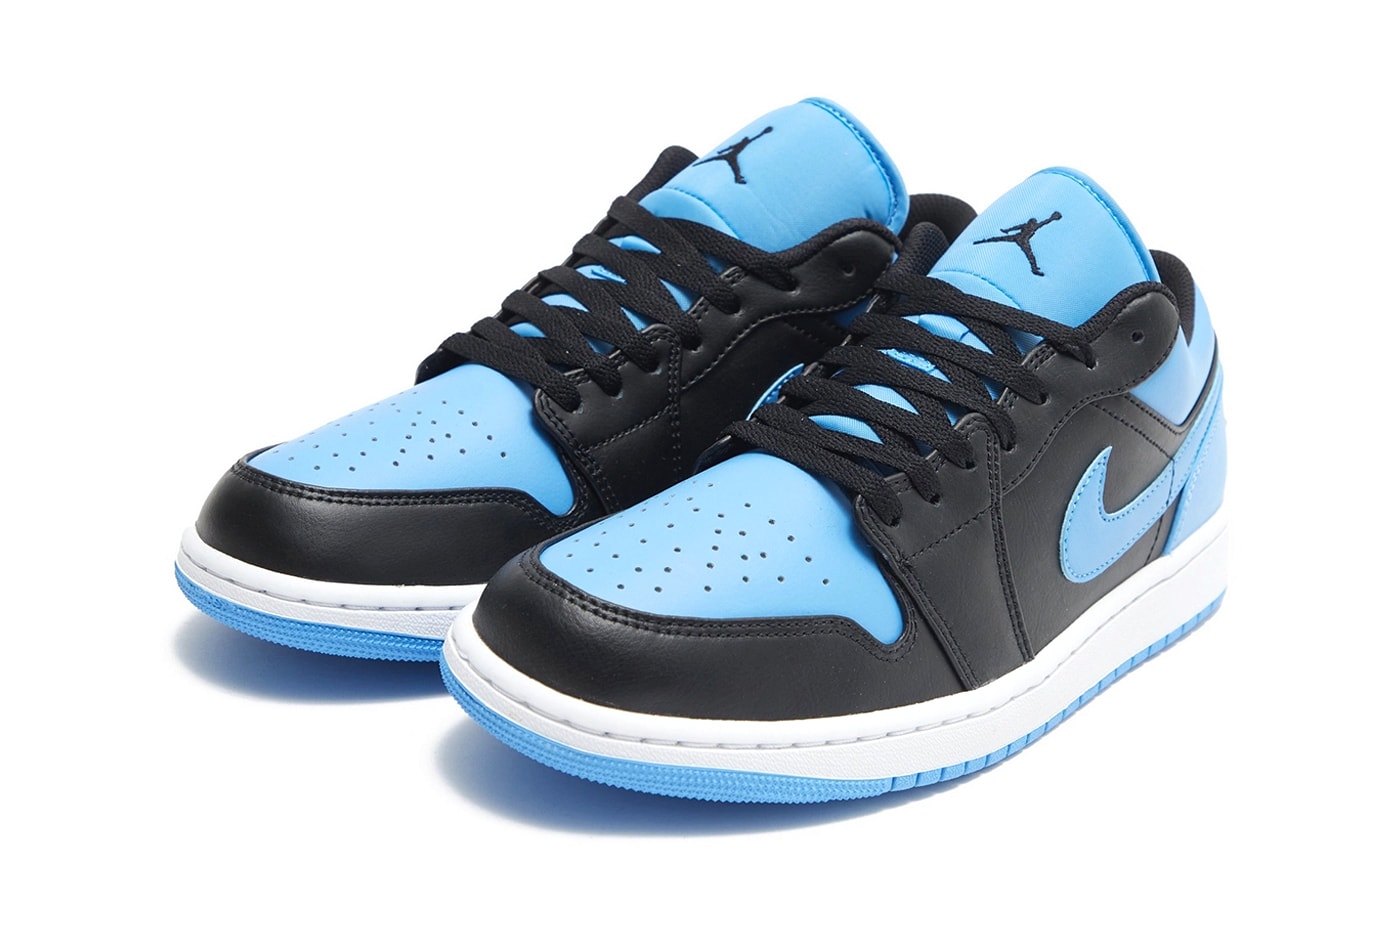 Air Jordan 1 Low Surfaces in Black and University Blue release info nike swoosh low top sneakers summer shoes unc university of north carolina